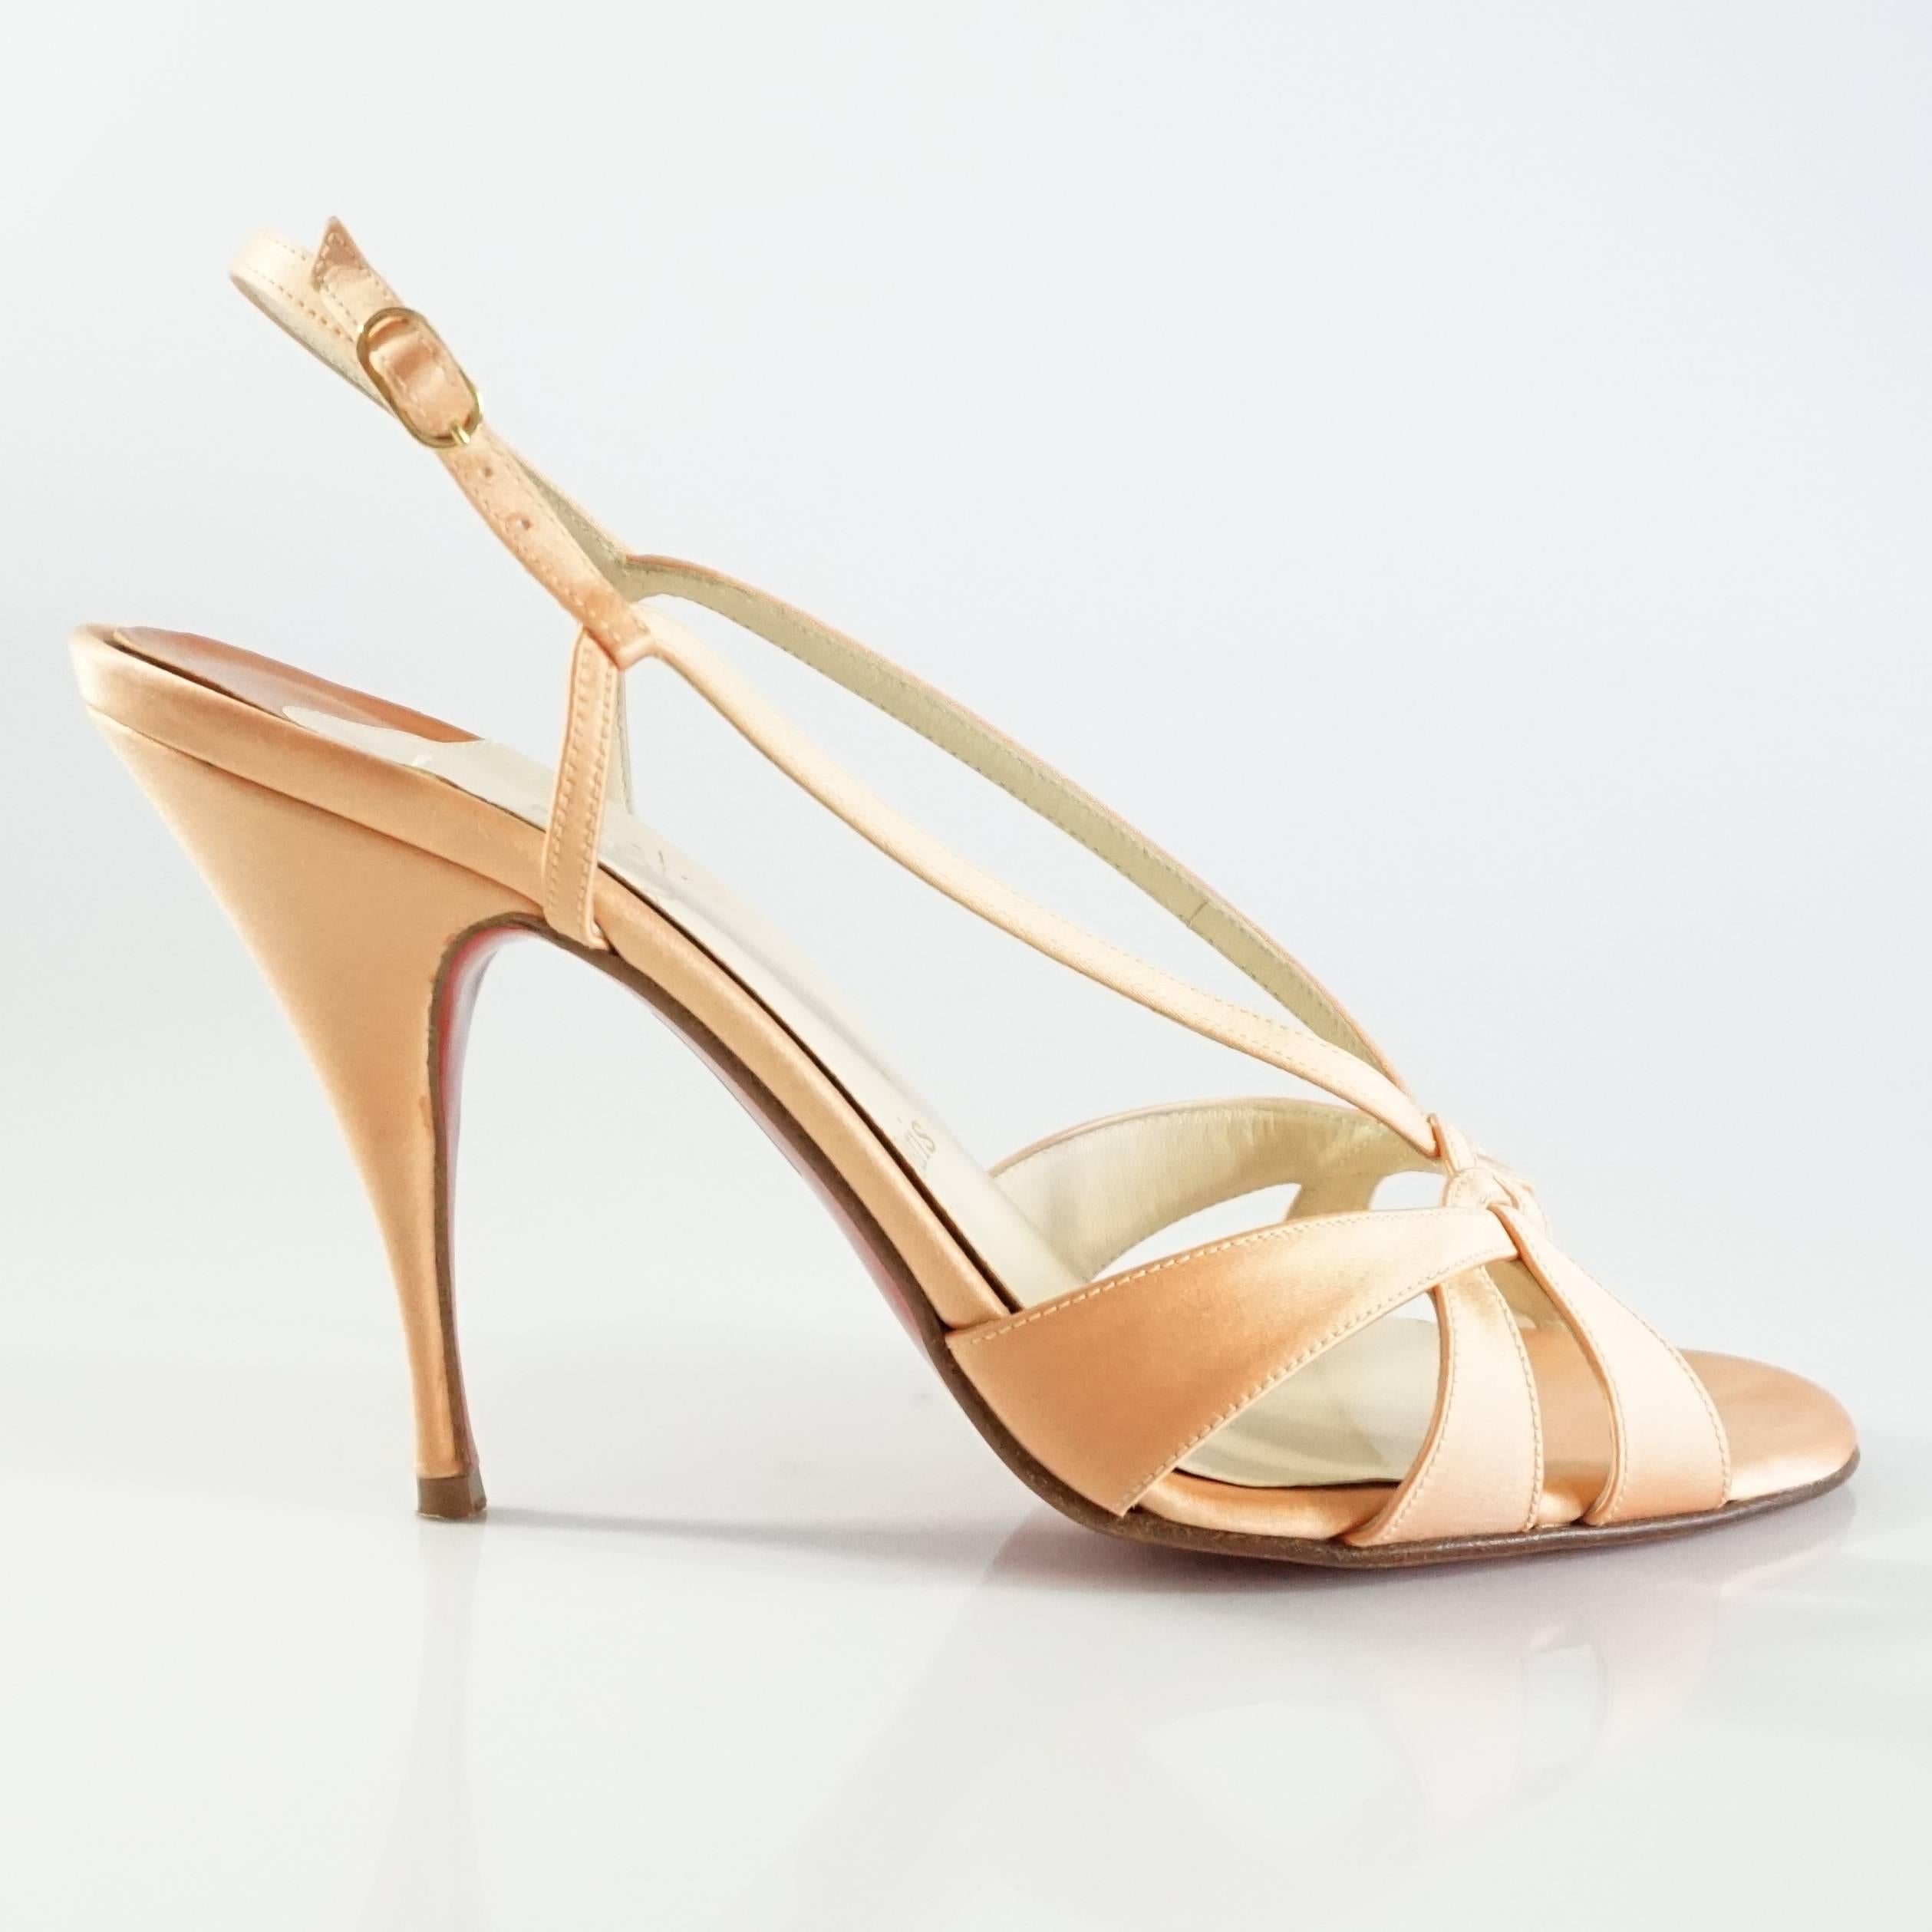 These Christian Louboutin heels are orange satin. They have a strappy design. These heels are in good condition with minor wear on the bottom, some markings on the fabric, wear on the toe bed, and lifted soles. Size 39.5.

Heel Height: 4”
